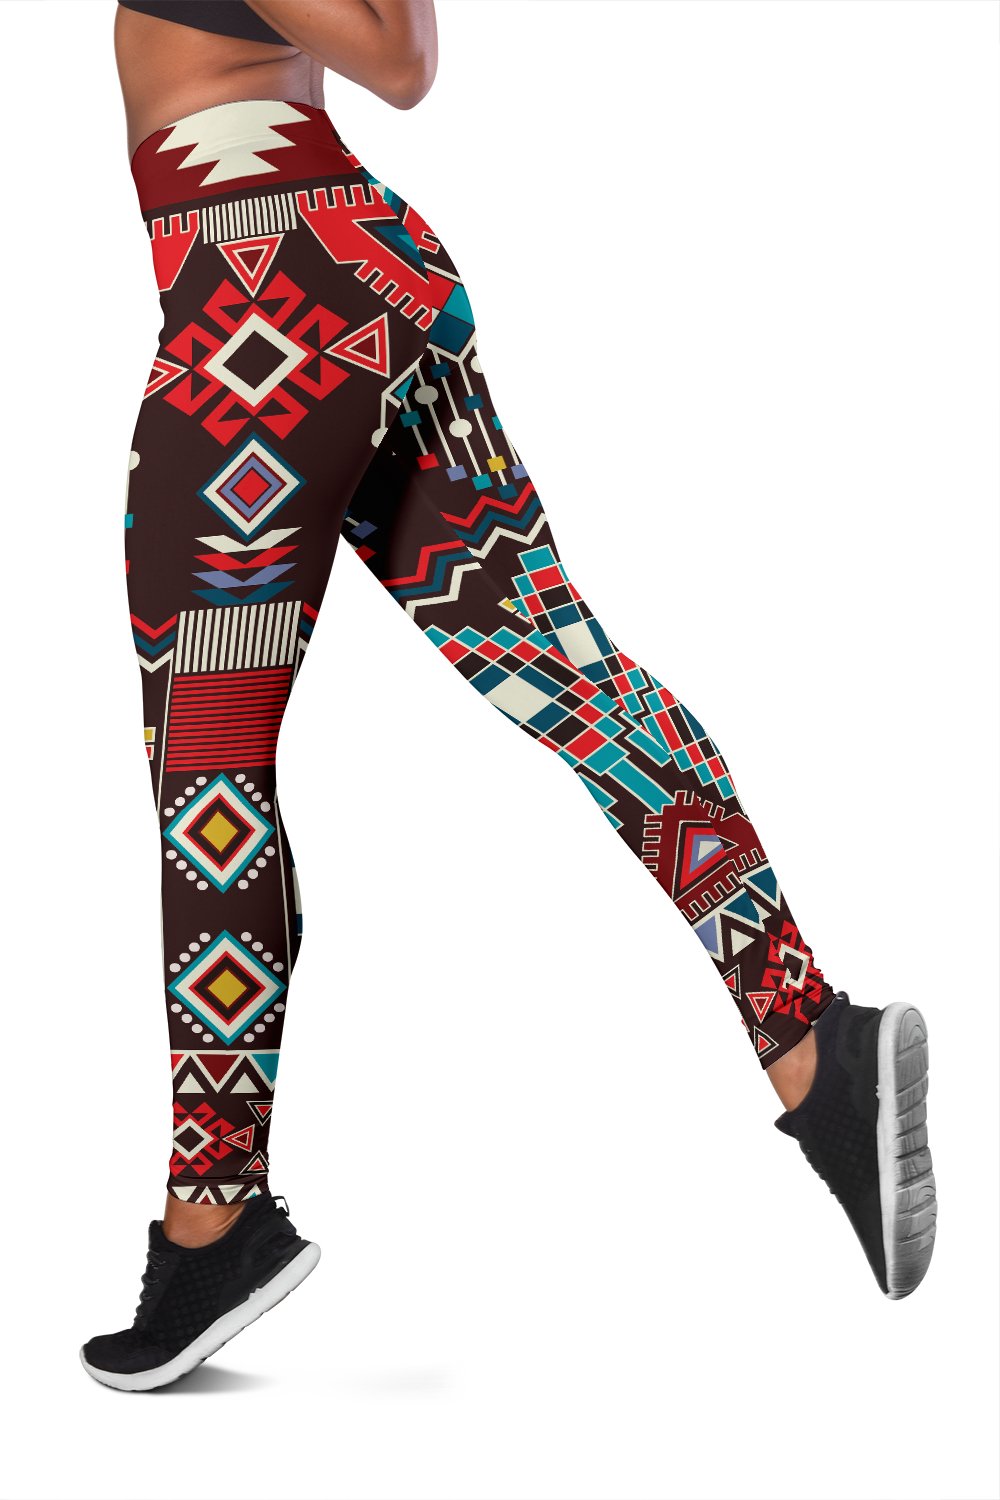 Stretchable Printed Leggings @ 65% OFF Rs 360.00 Only FREE Shipping + Extra  Discount - Printed Leggings, Buy Printed Leggings Online, Leggings &  Jeggings, o… | Printed leggings, Stylish leggings, Leggings